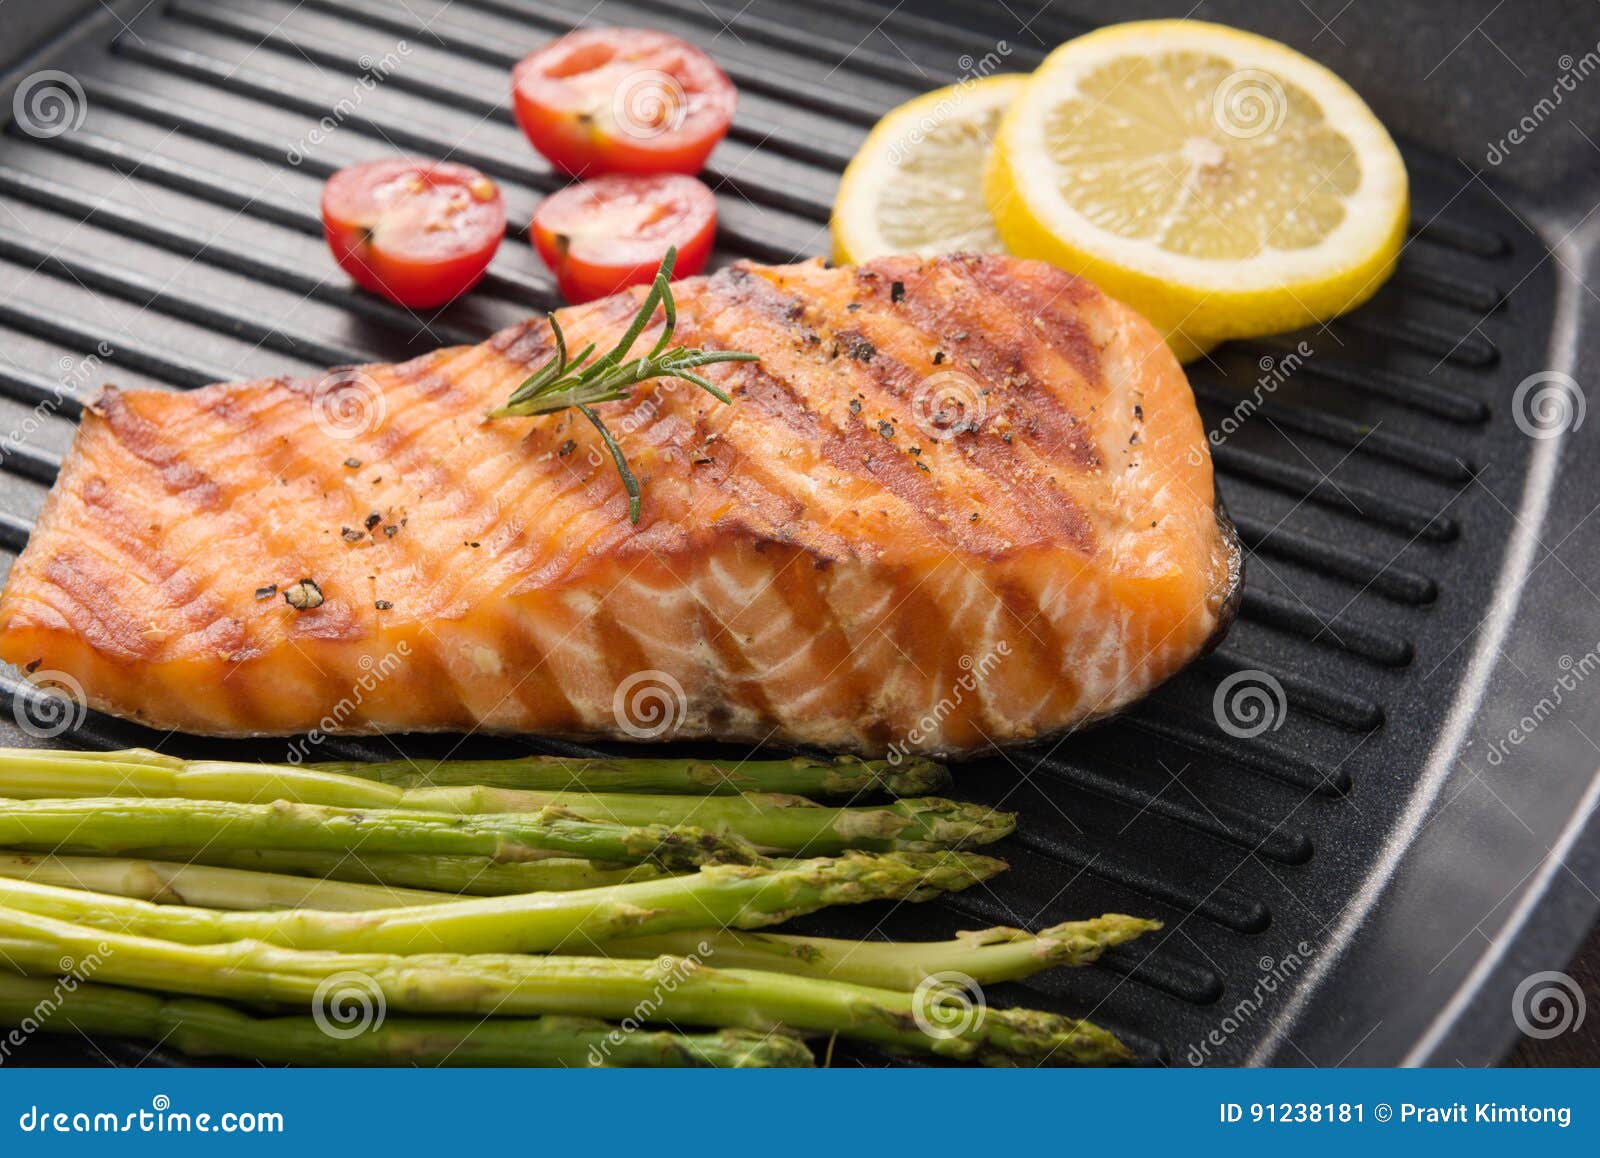 grilled salmon cooked bbq on a pan on wooden background